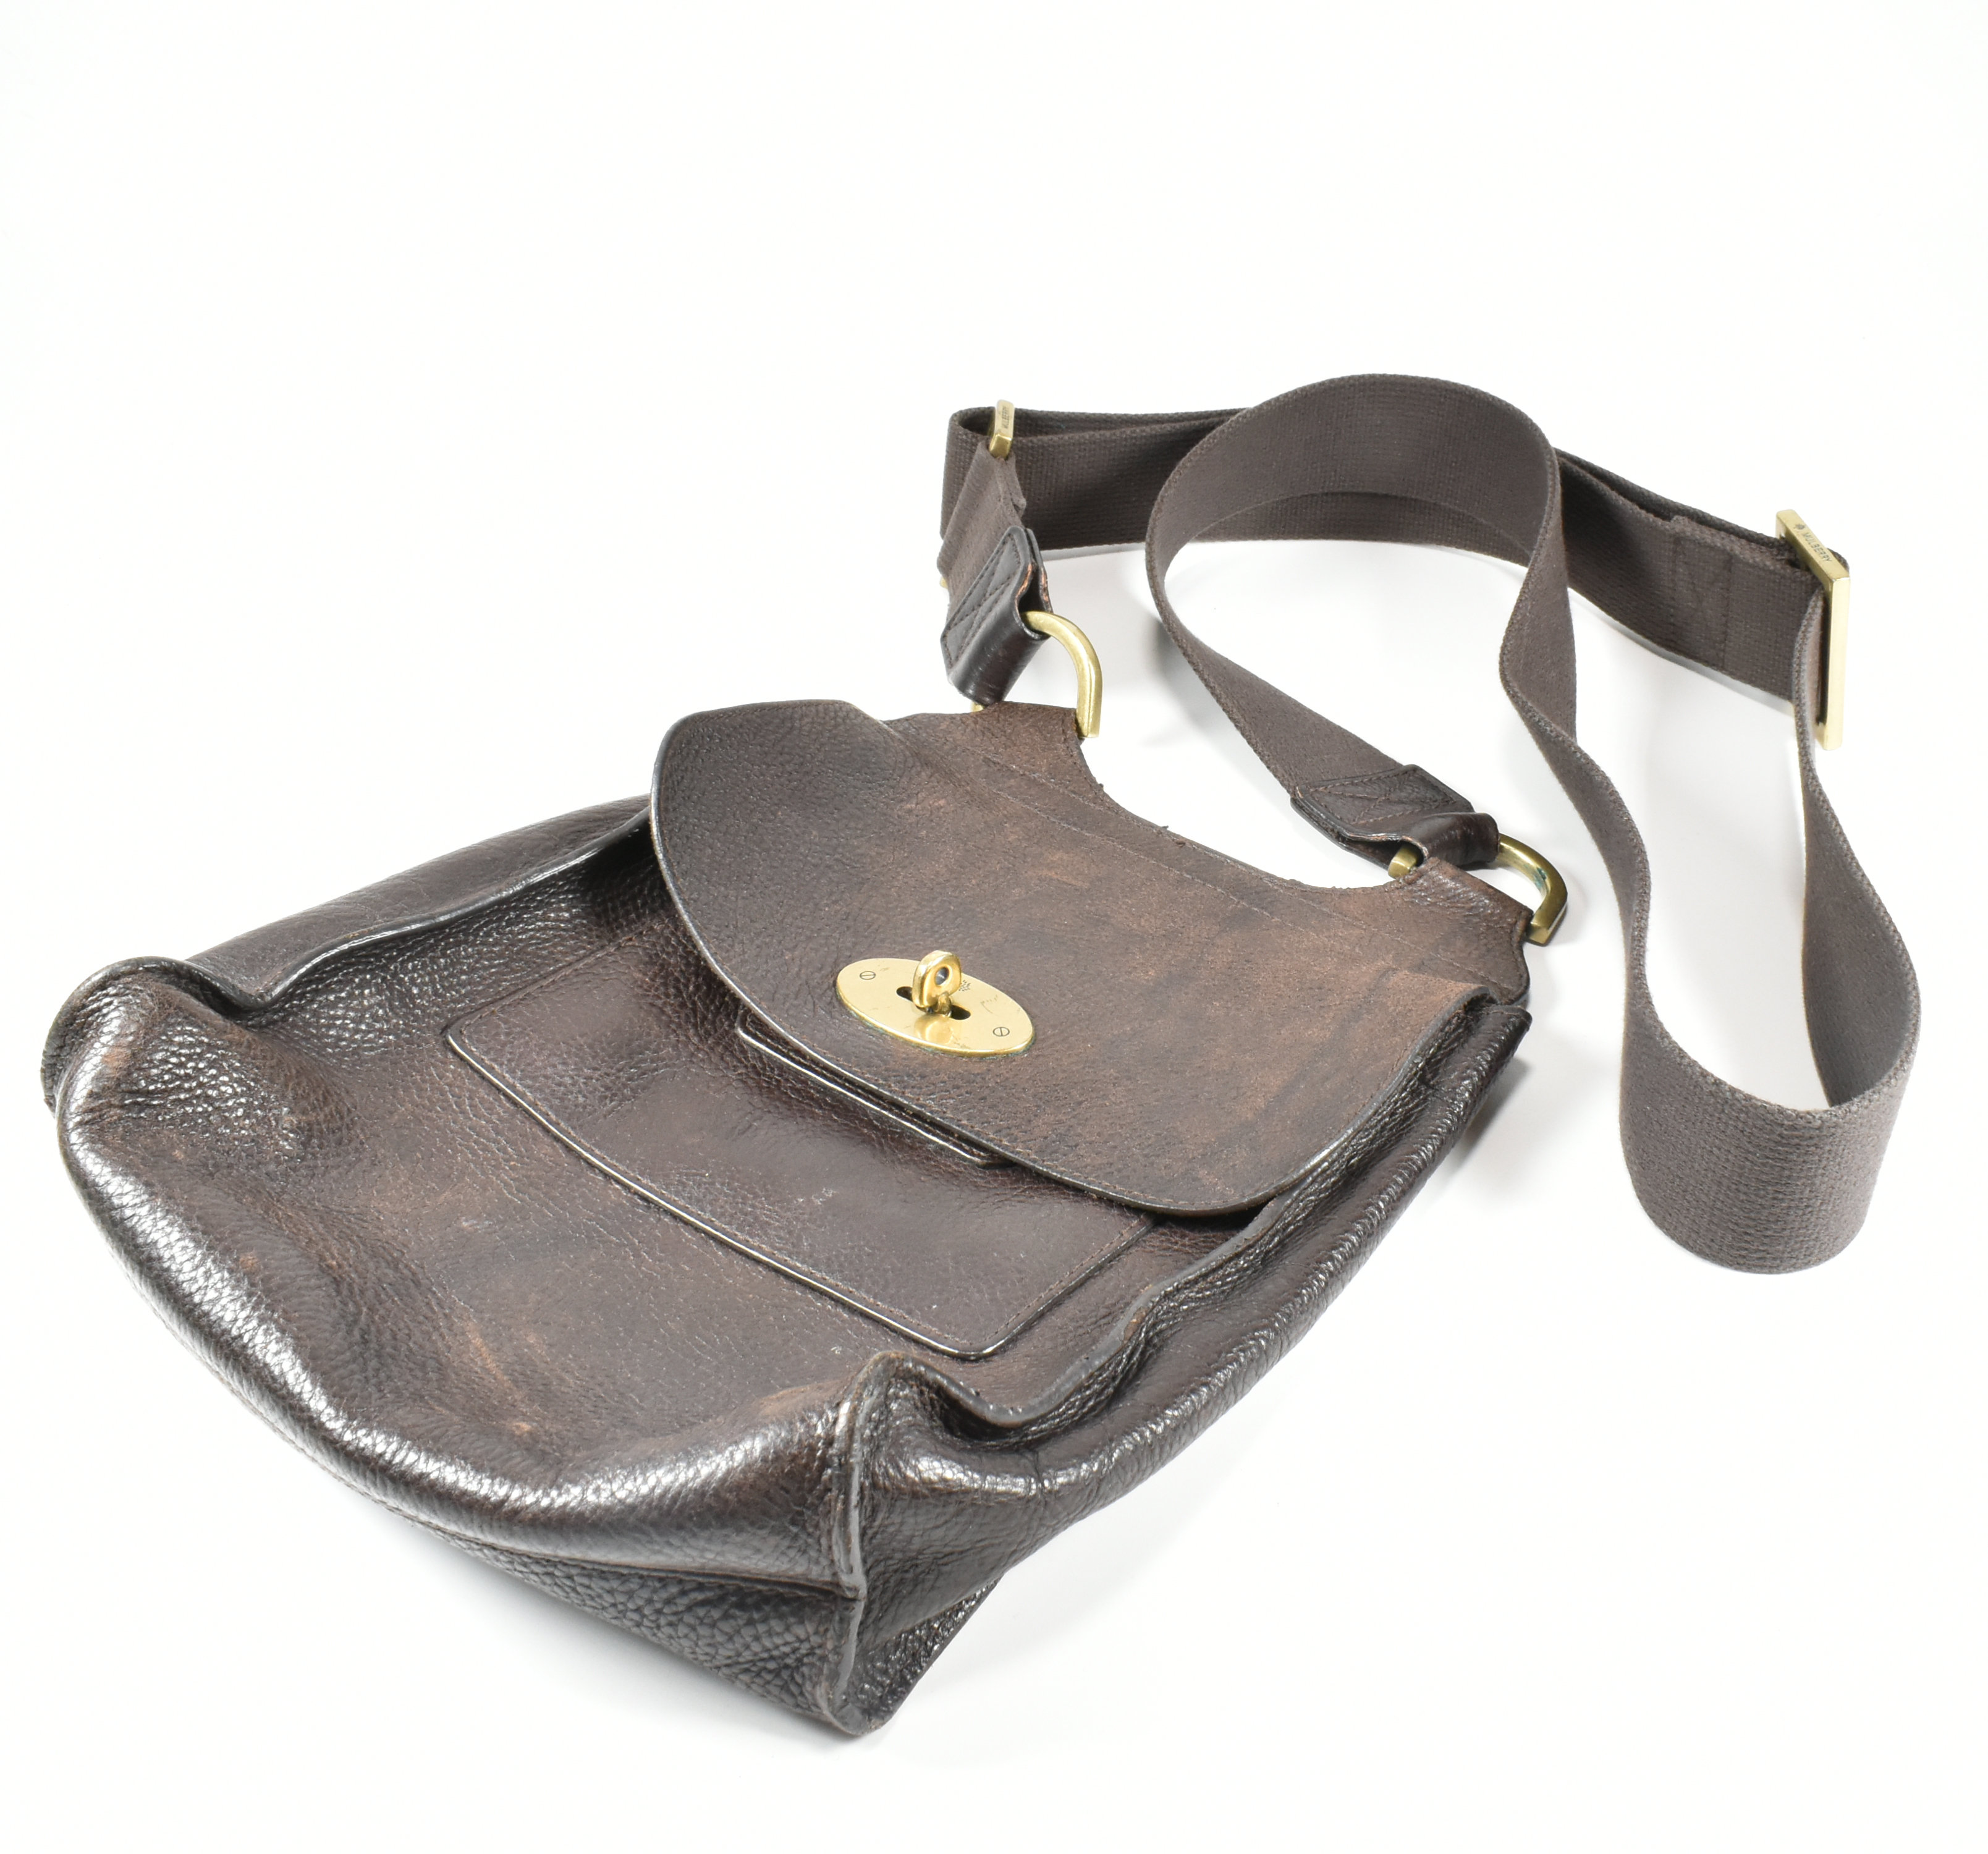 MULBERRY BROWN LEATHER ANTONY CROSSBODY BAG - Image 9 of 9